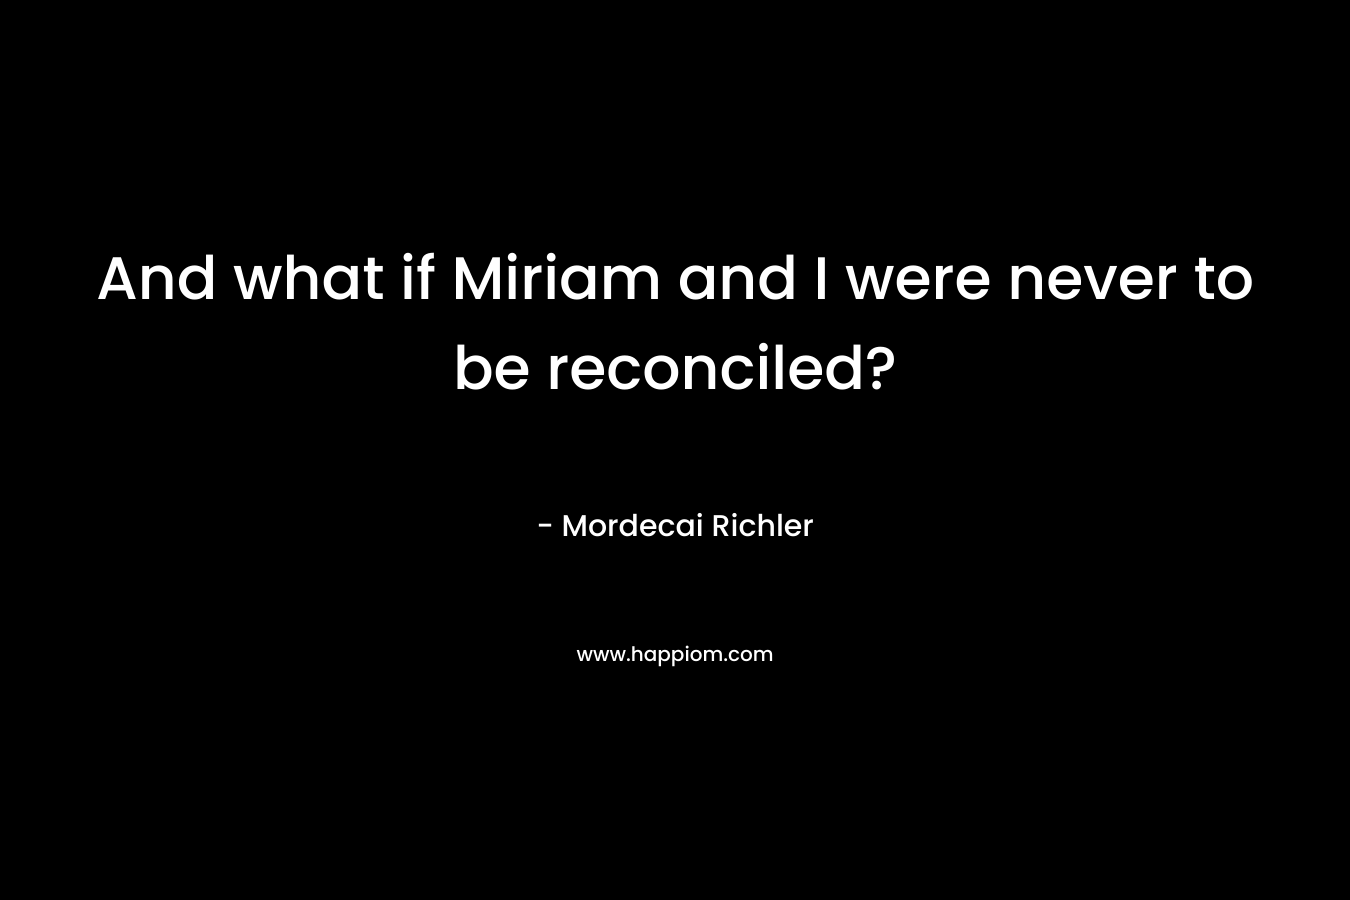 And what if Miriam and I were never to be reconciled?